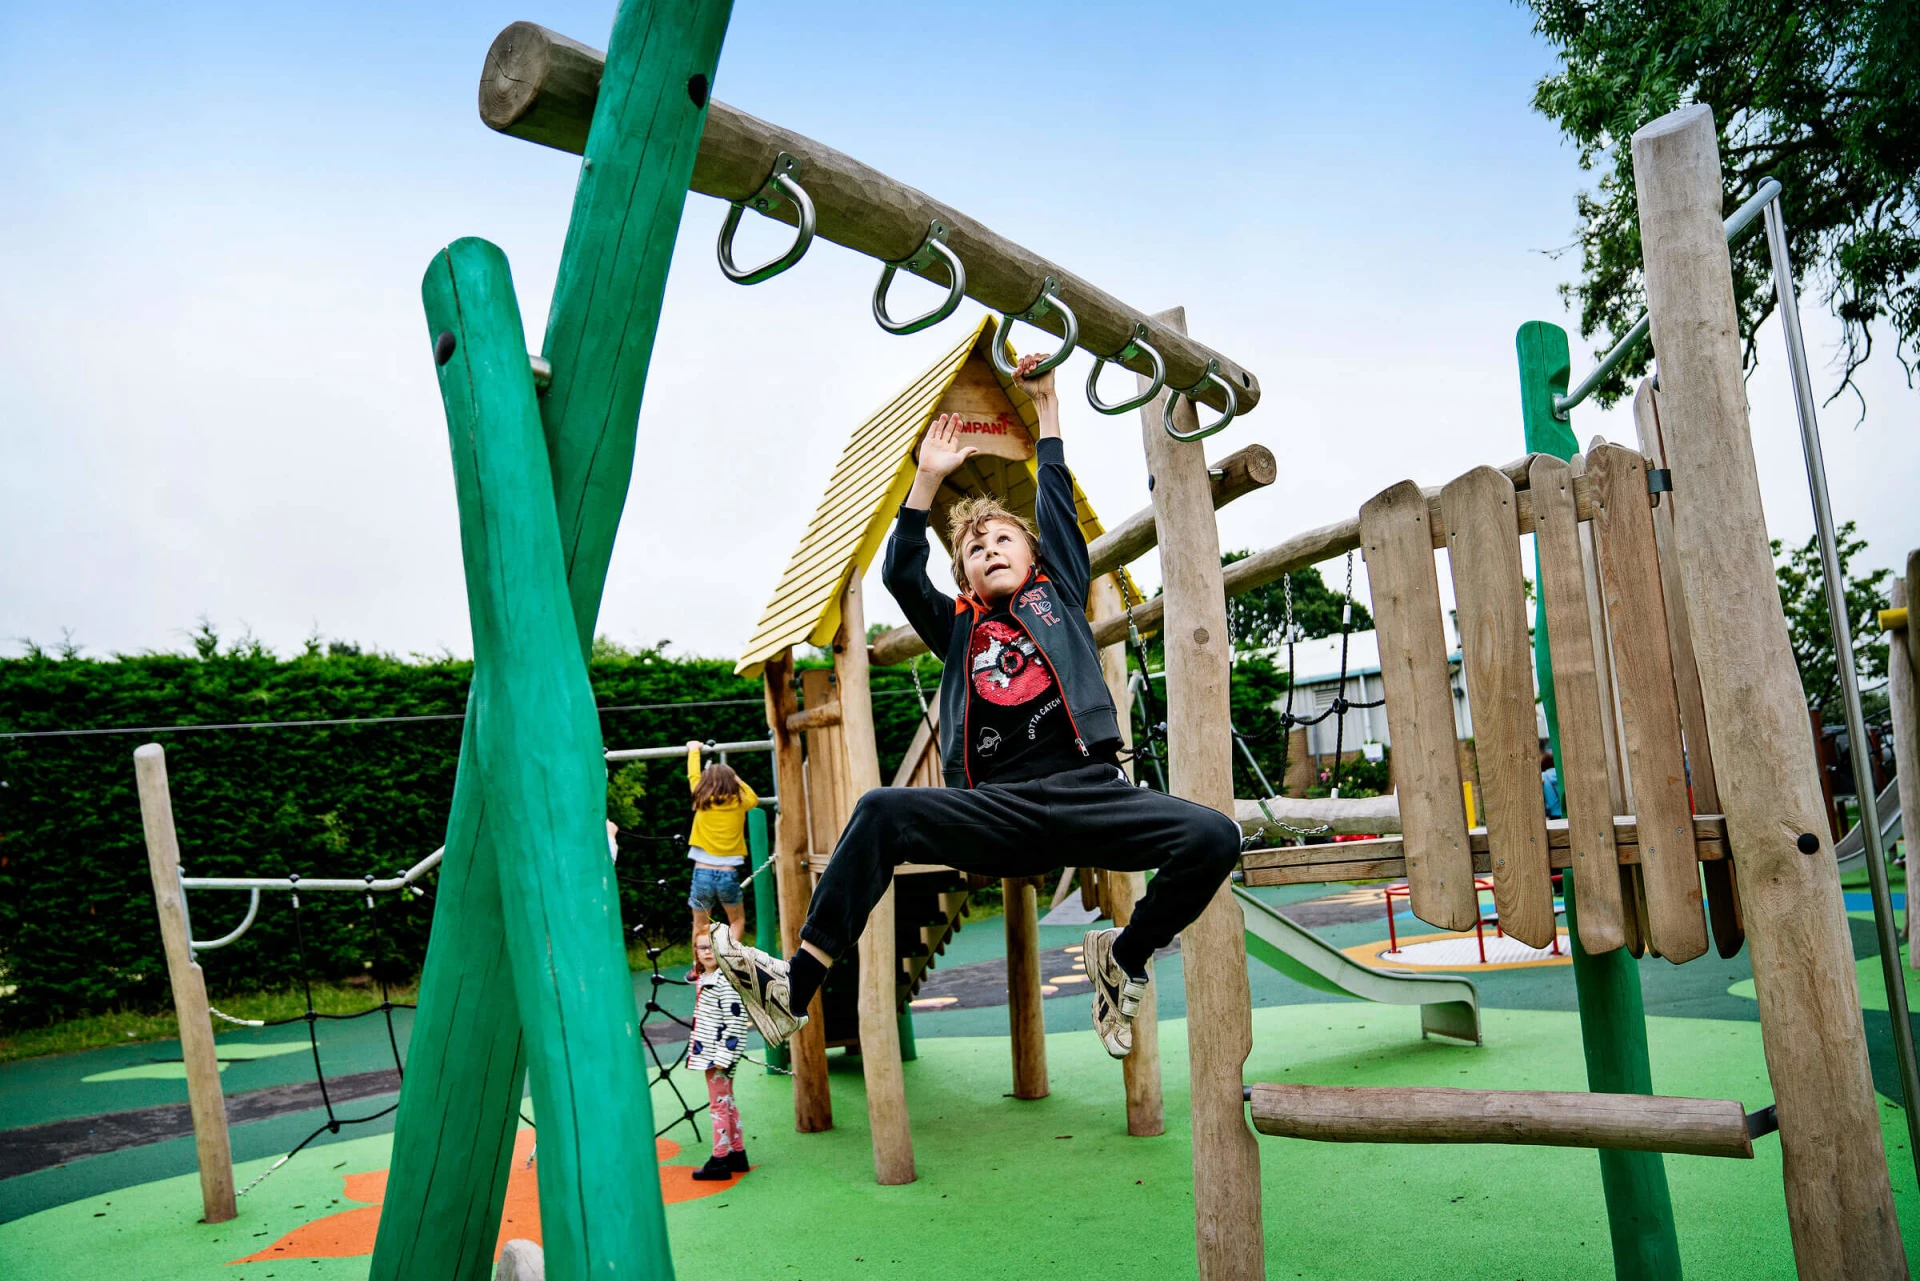 Boy swings from hand to hand on wooden playstructure in Poppleton